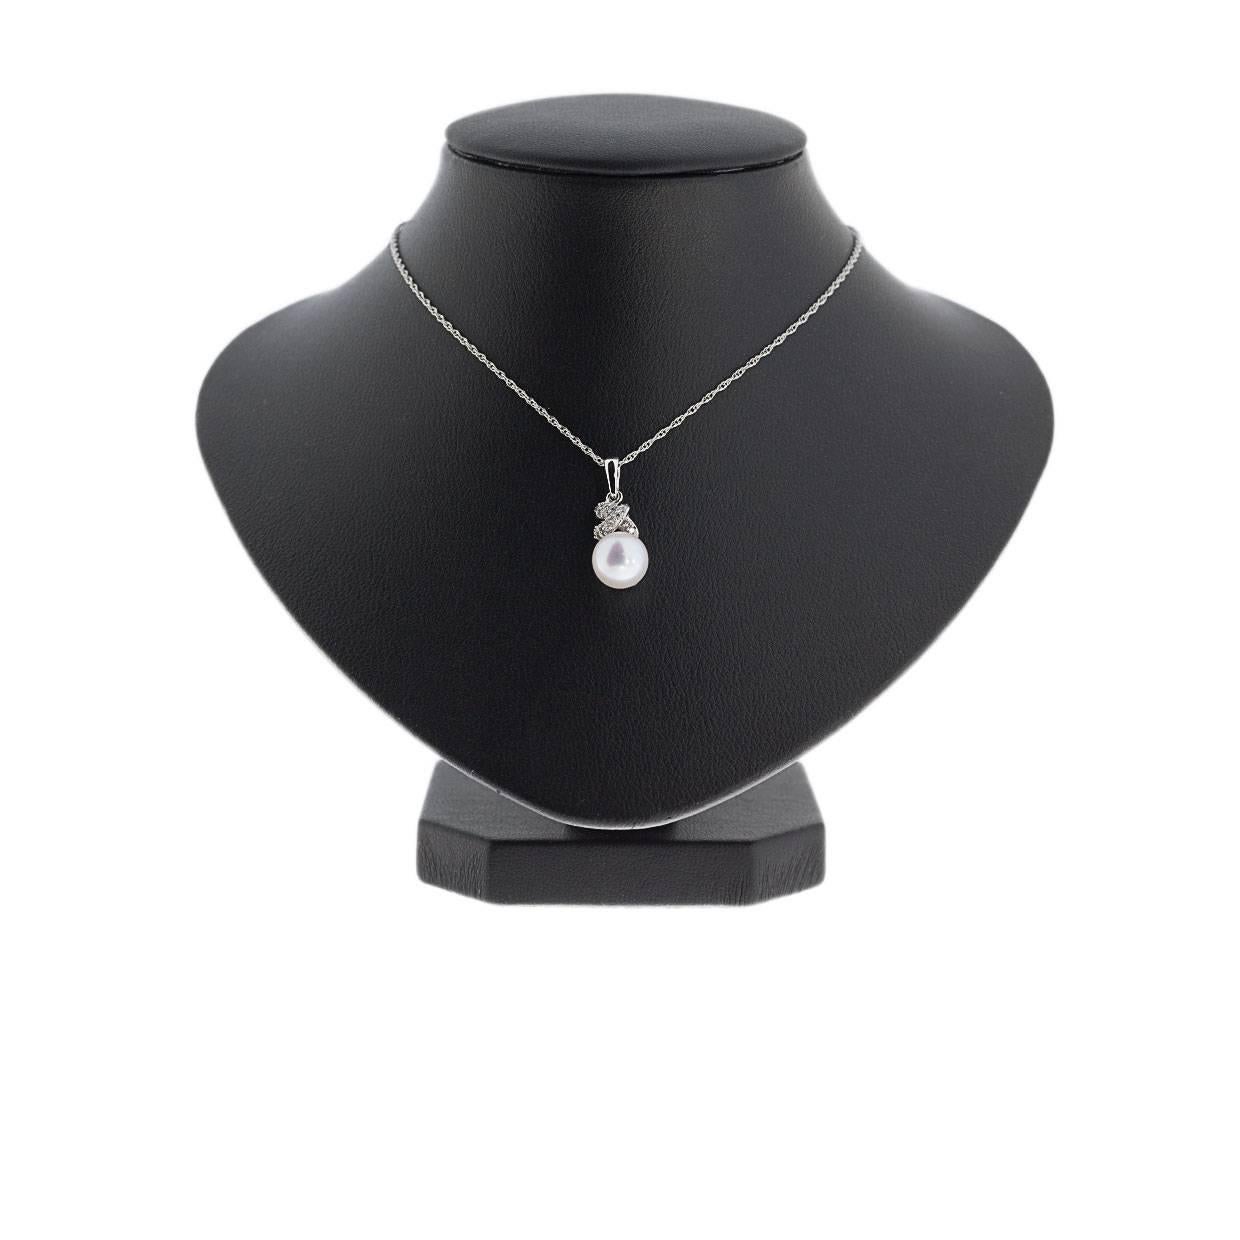 Simple yet elegant & beautiful would be the best way to describe this stunning pendant! This lustrous pearl is accented on top by sparkly, round brilliant cut diamonds. This timeless, classy pendant would make perfect gift for any woman, so make